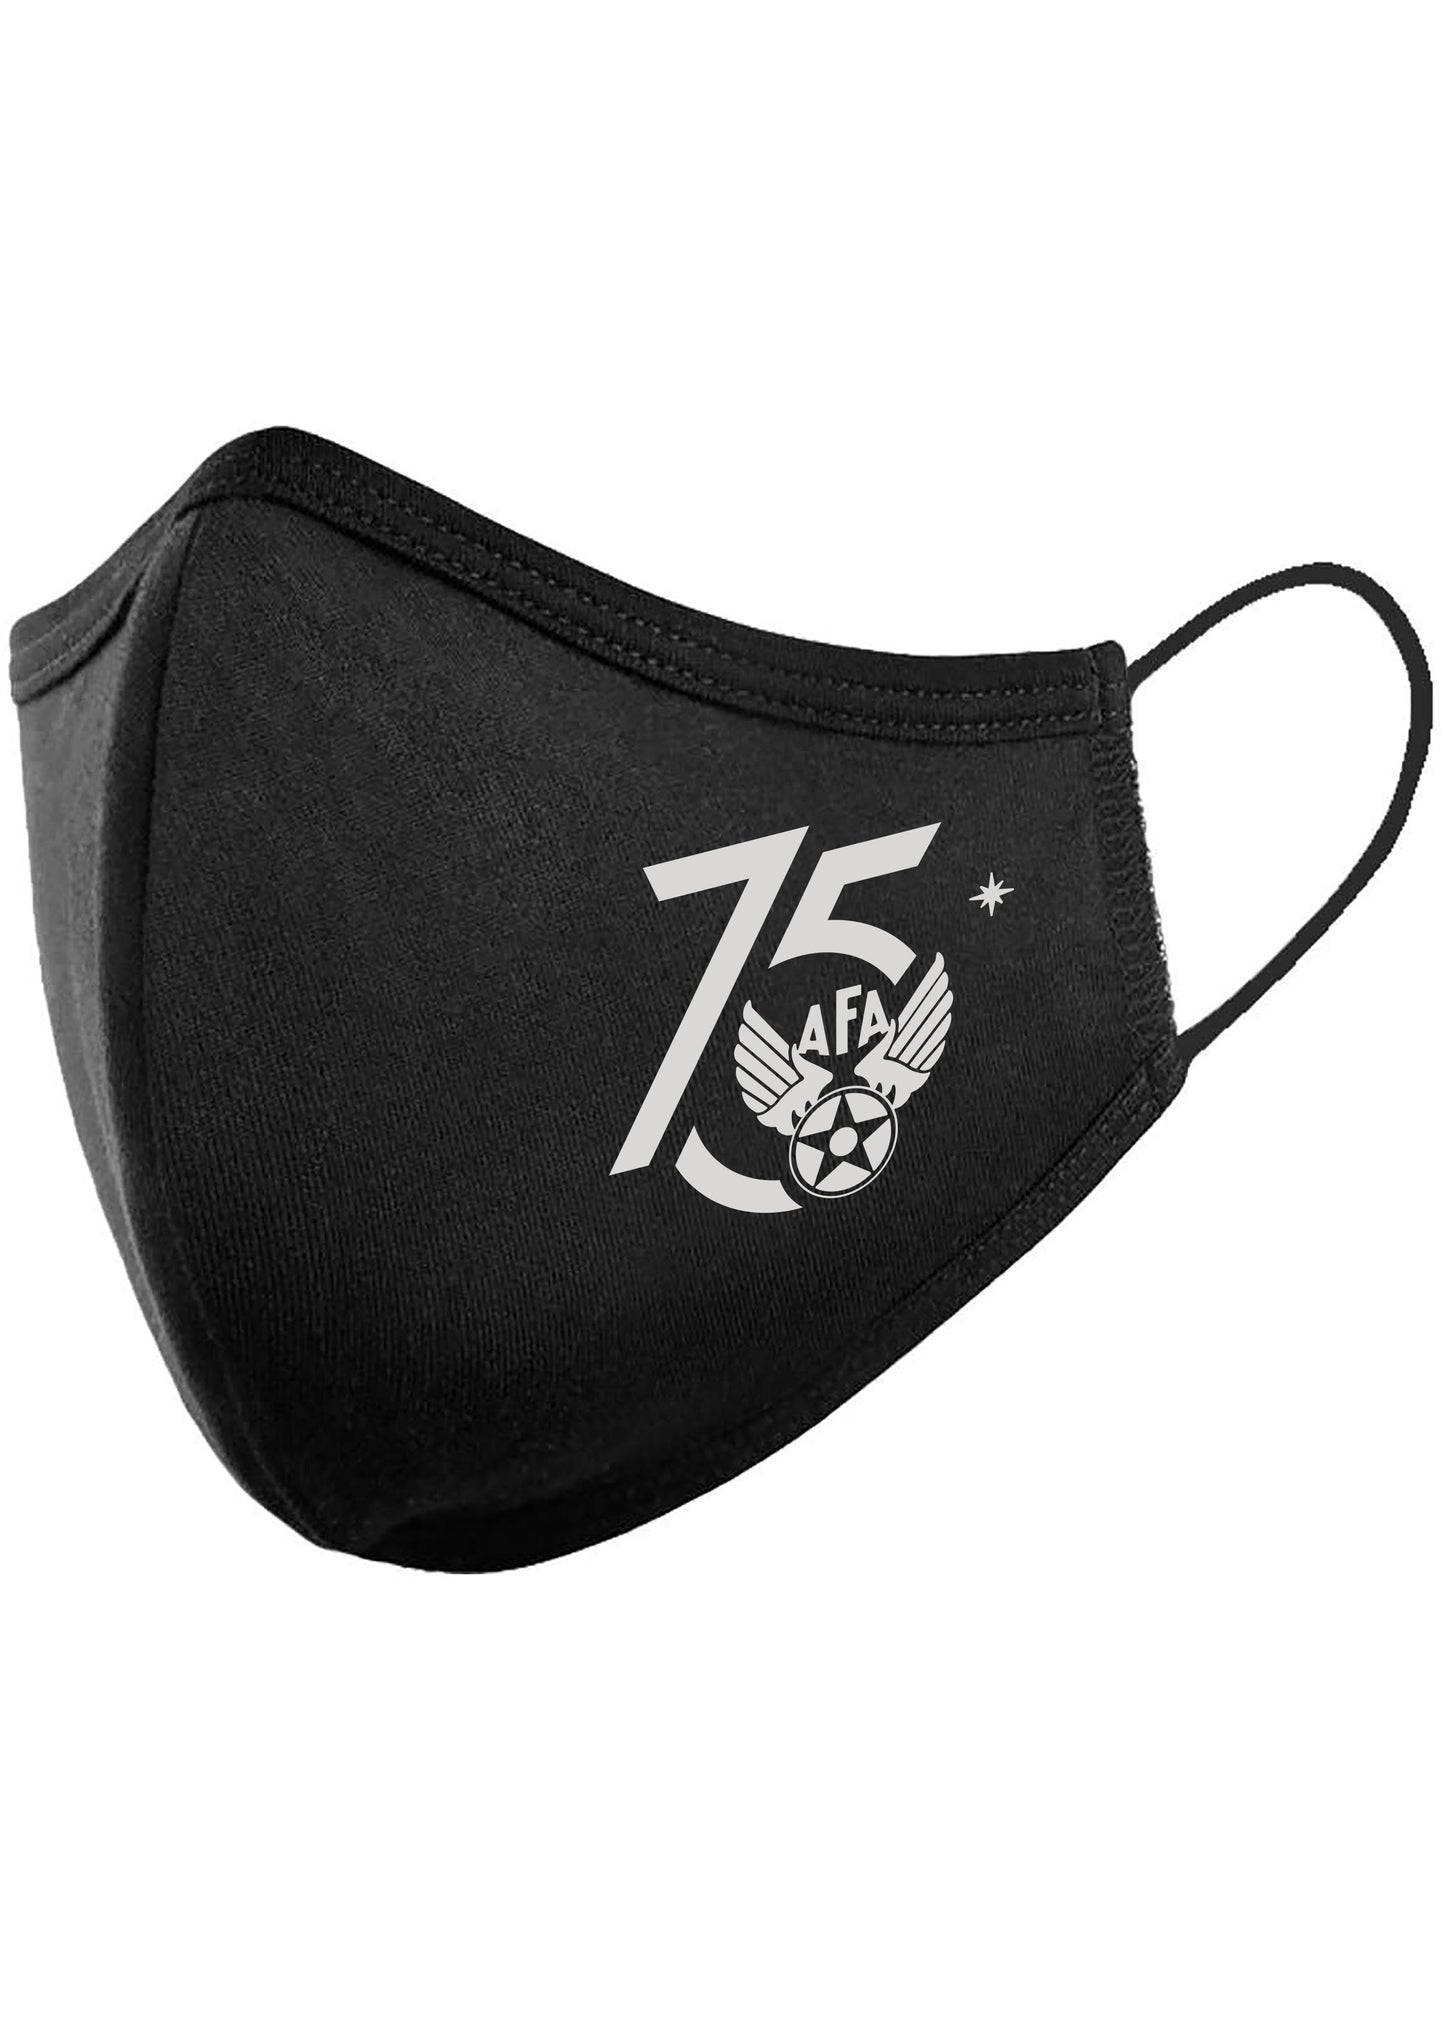 Air Force Association 75th Anniversary Face Mask